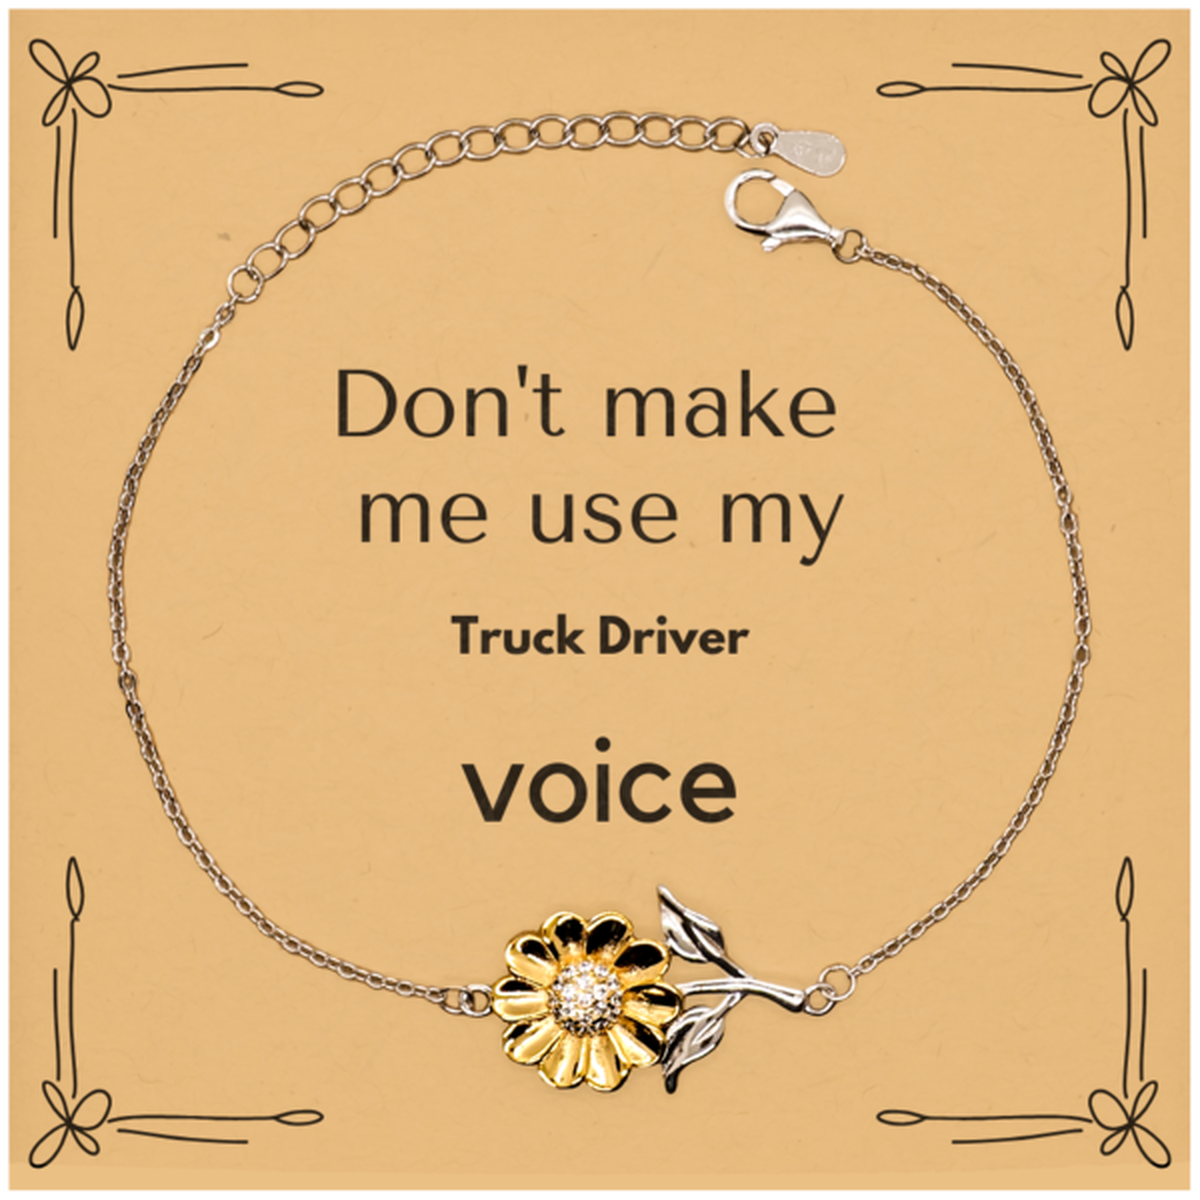 Don't make me use my Truck Driver voice, Sarcasm Truck Driver Card Gifts, Christmas Truck Driver Sunflower Bracelet Birthday Unique Gifts For Truck Driver Coworkers, Men, Women, Colleague, Friends